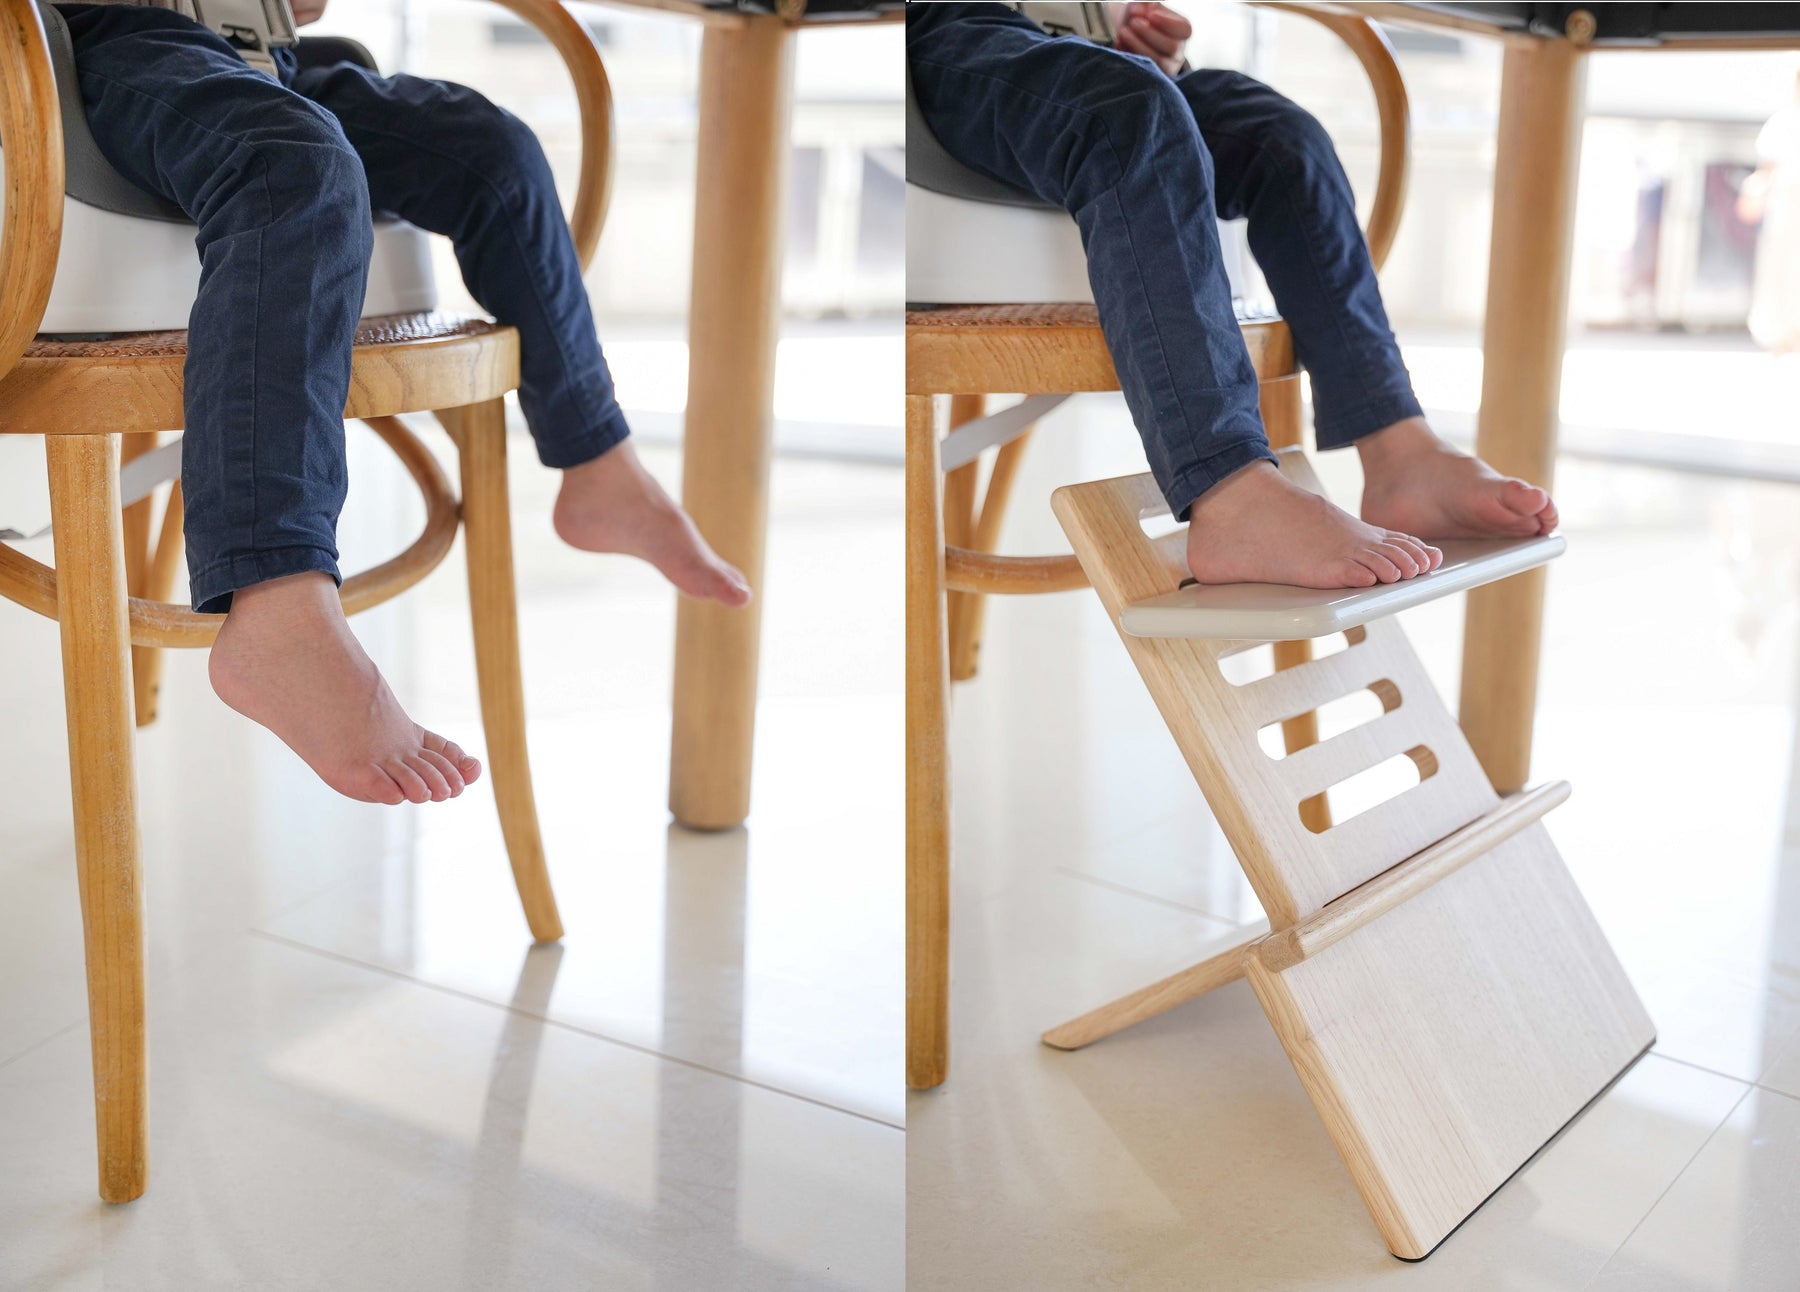 Home of the Footsi. Portable, height adjustable footrest for the